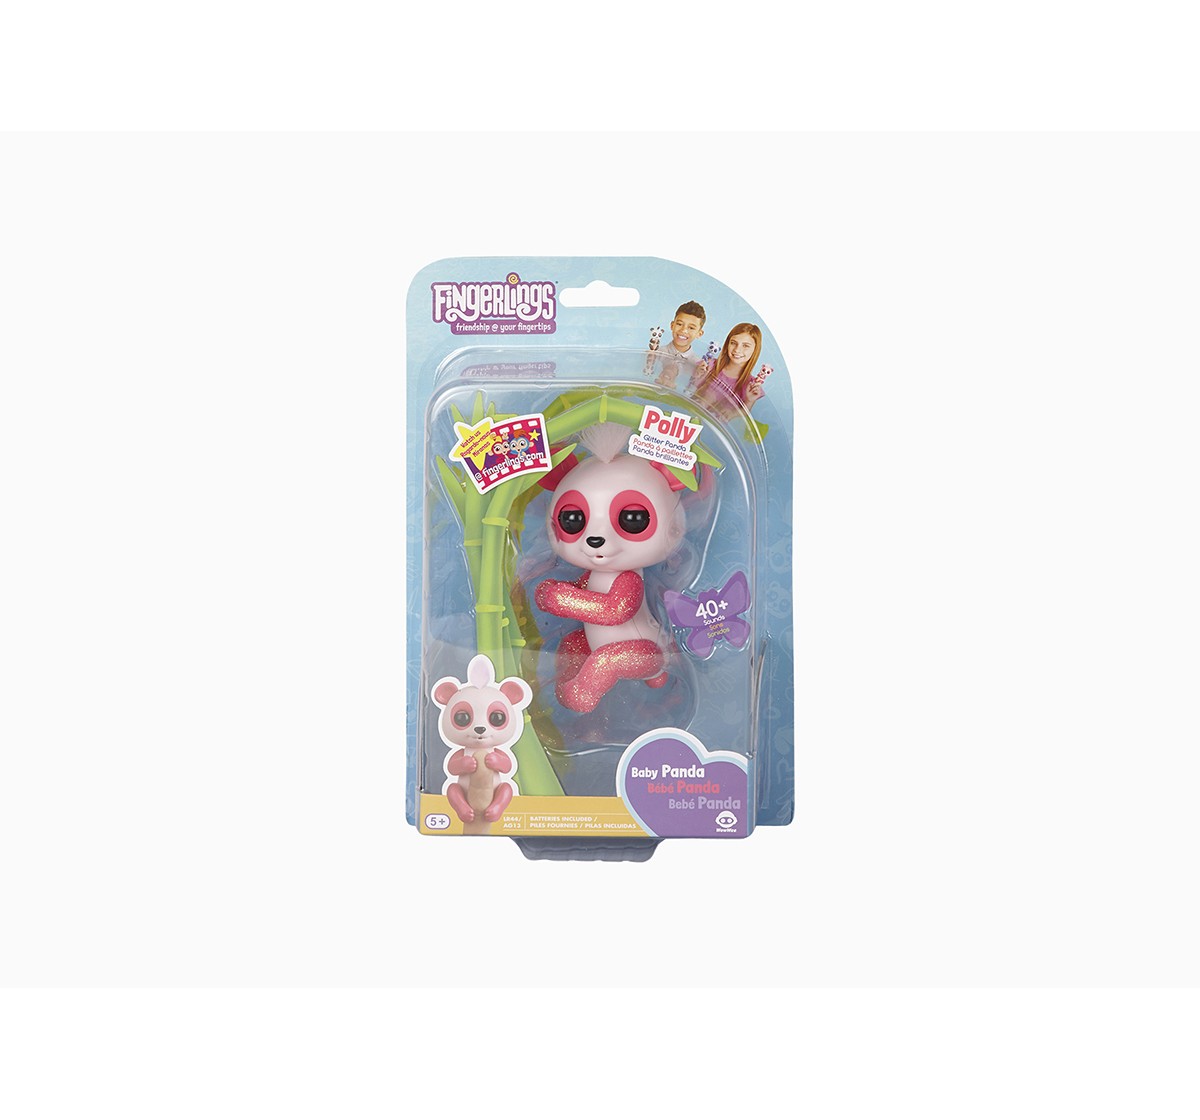 Fingerlings Baby Panda Polly Robotics for Kids age 4Y+ (Pink)